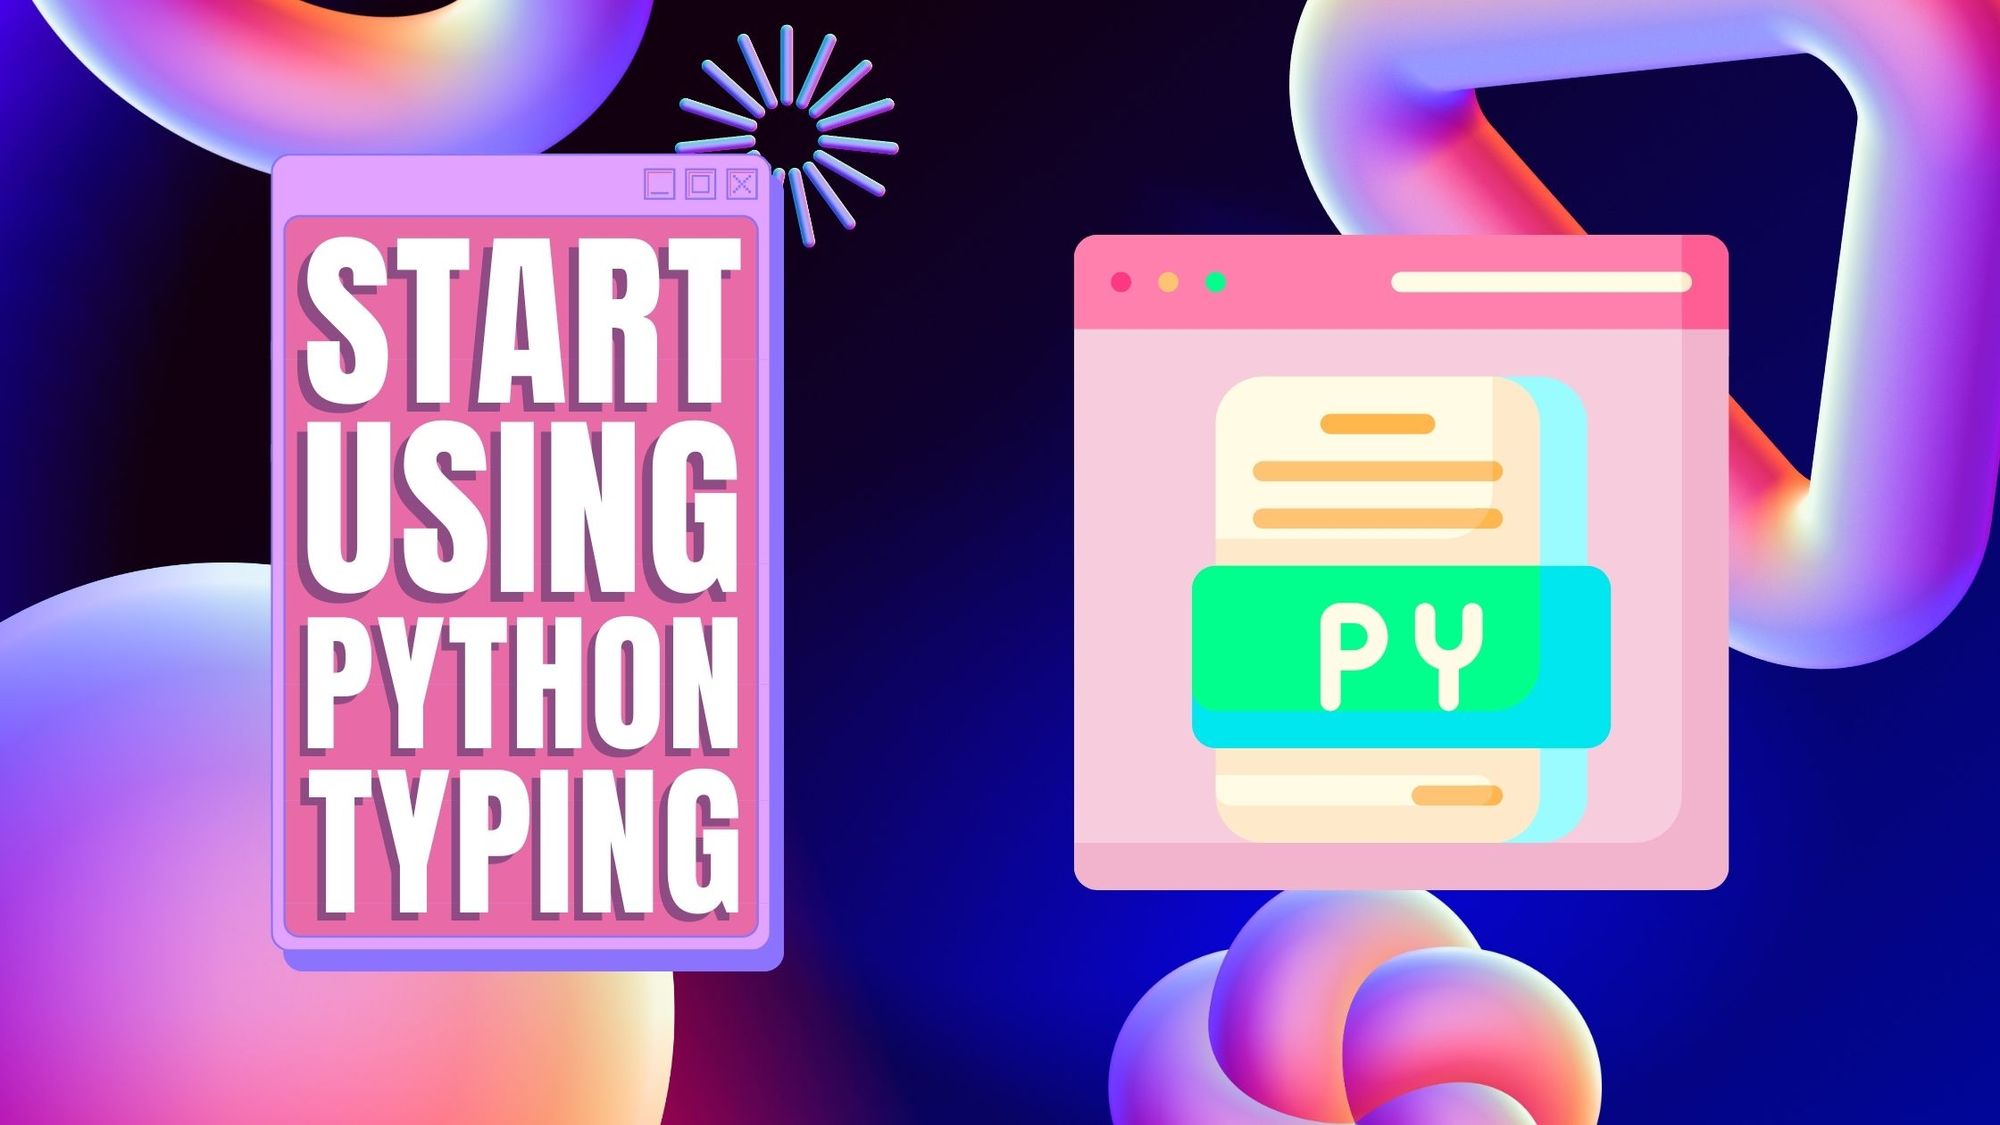 How to start using Python typing?